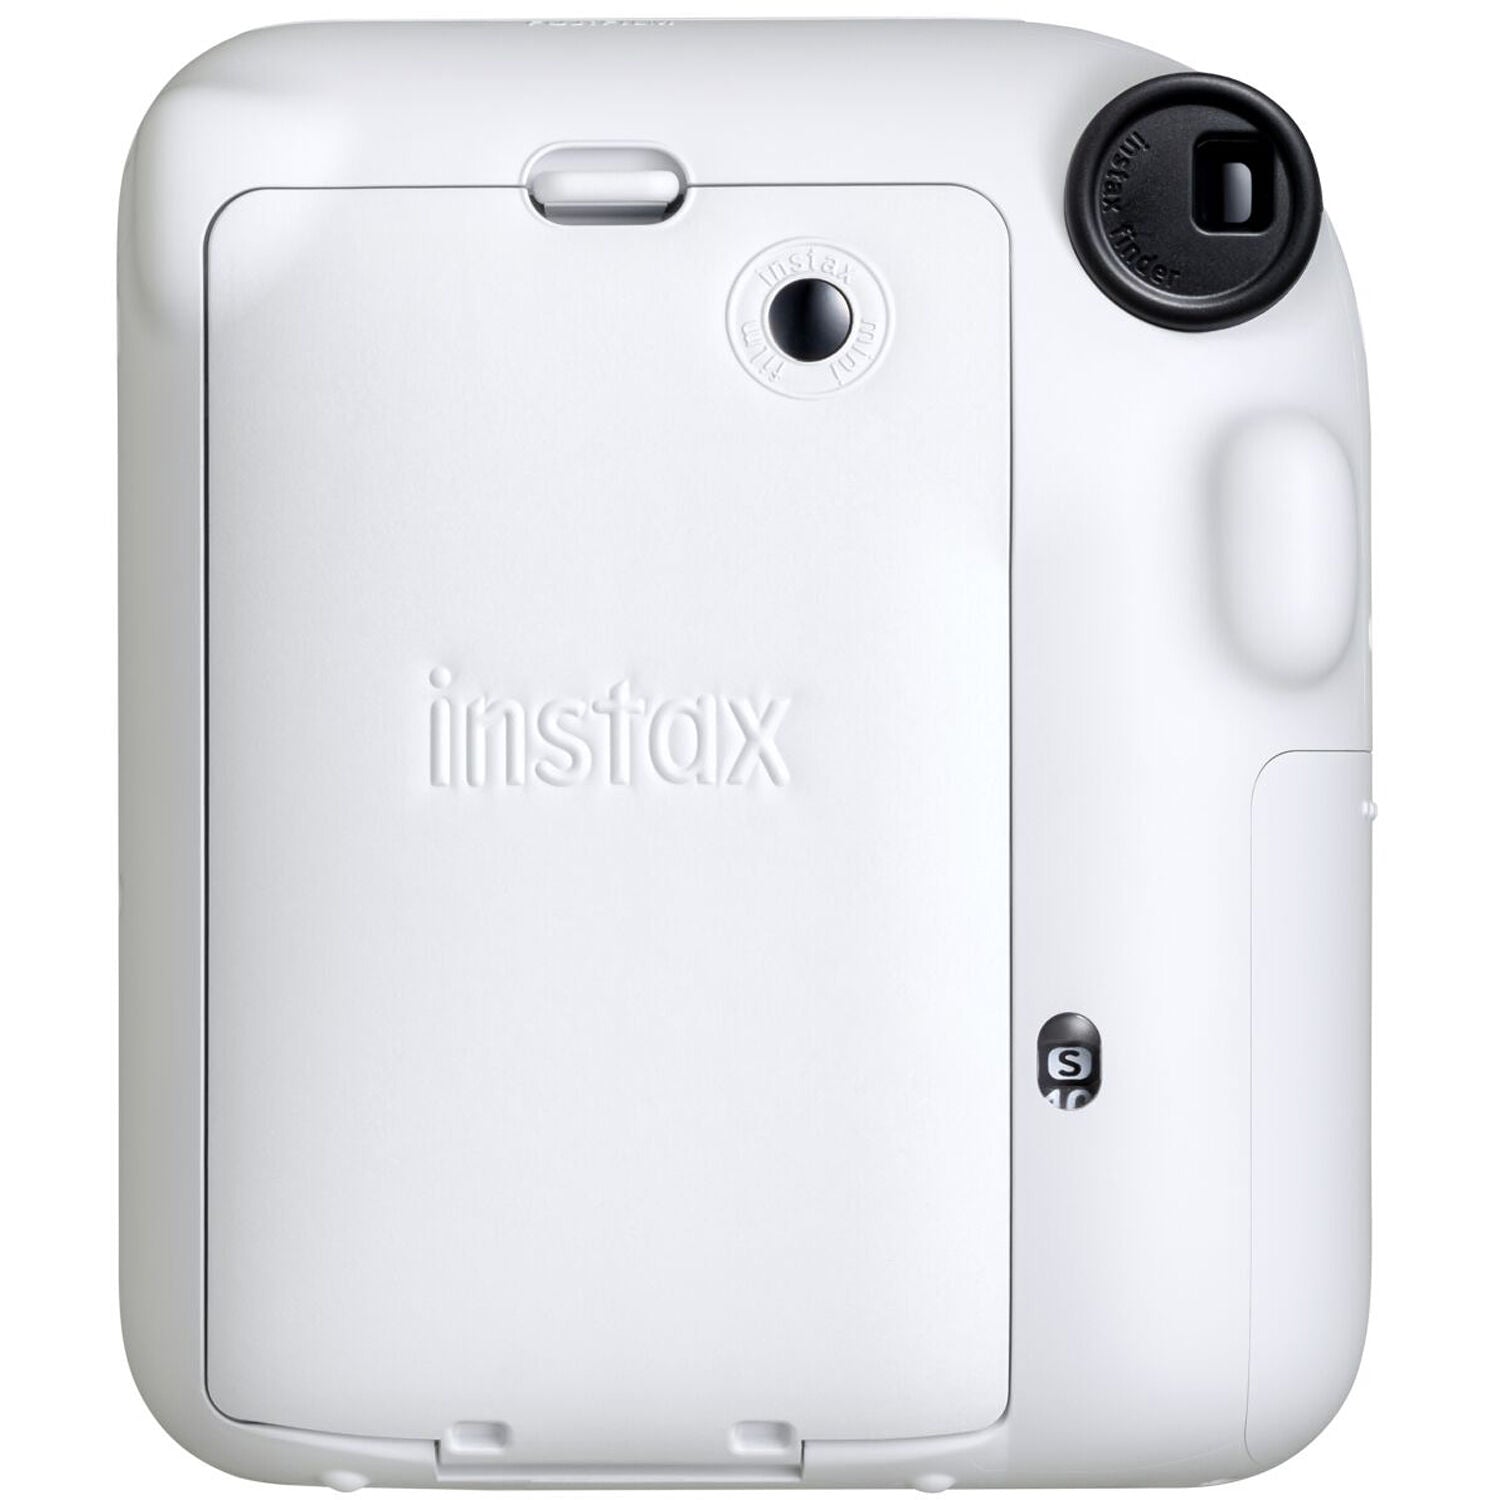 FUJIFILM INSTAX Mini 12 Instant Film Camera with 10X2 Pack of Instant Film (Clay White)